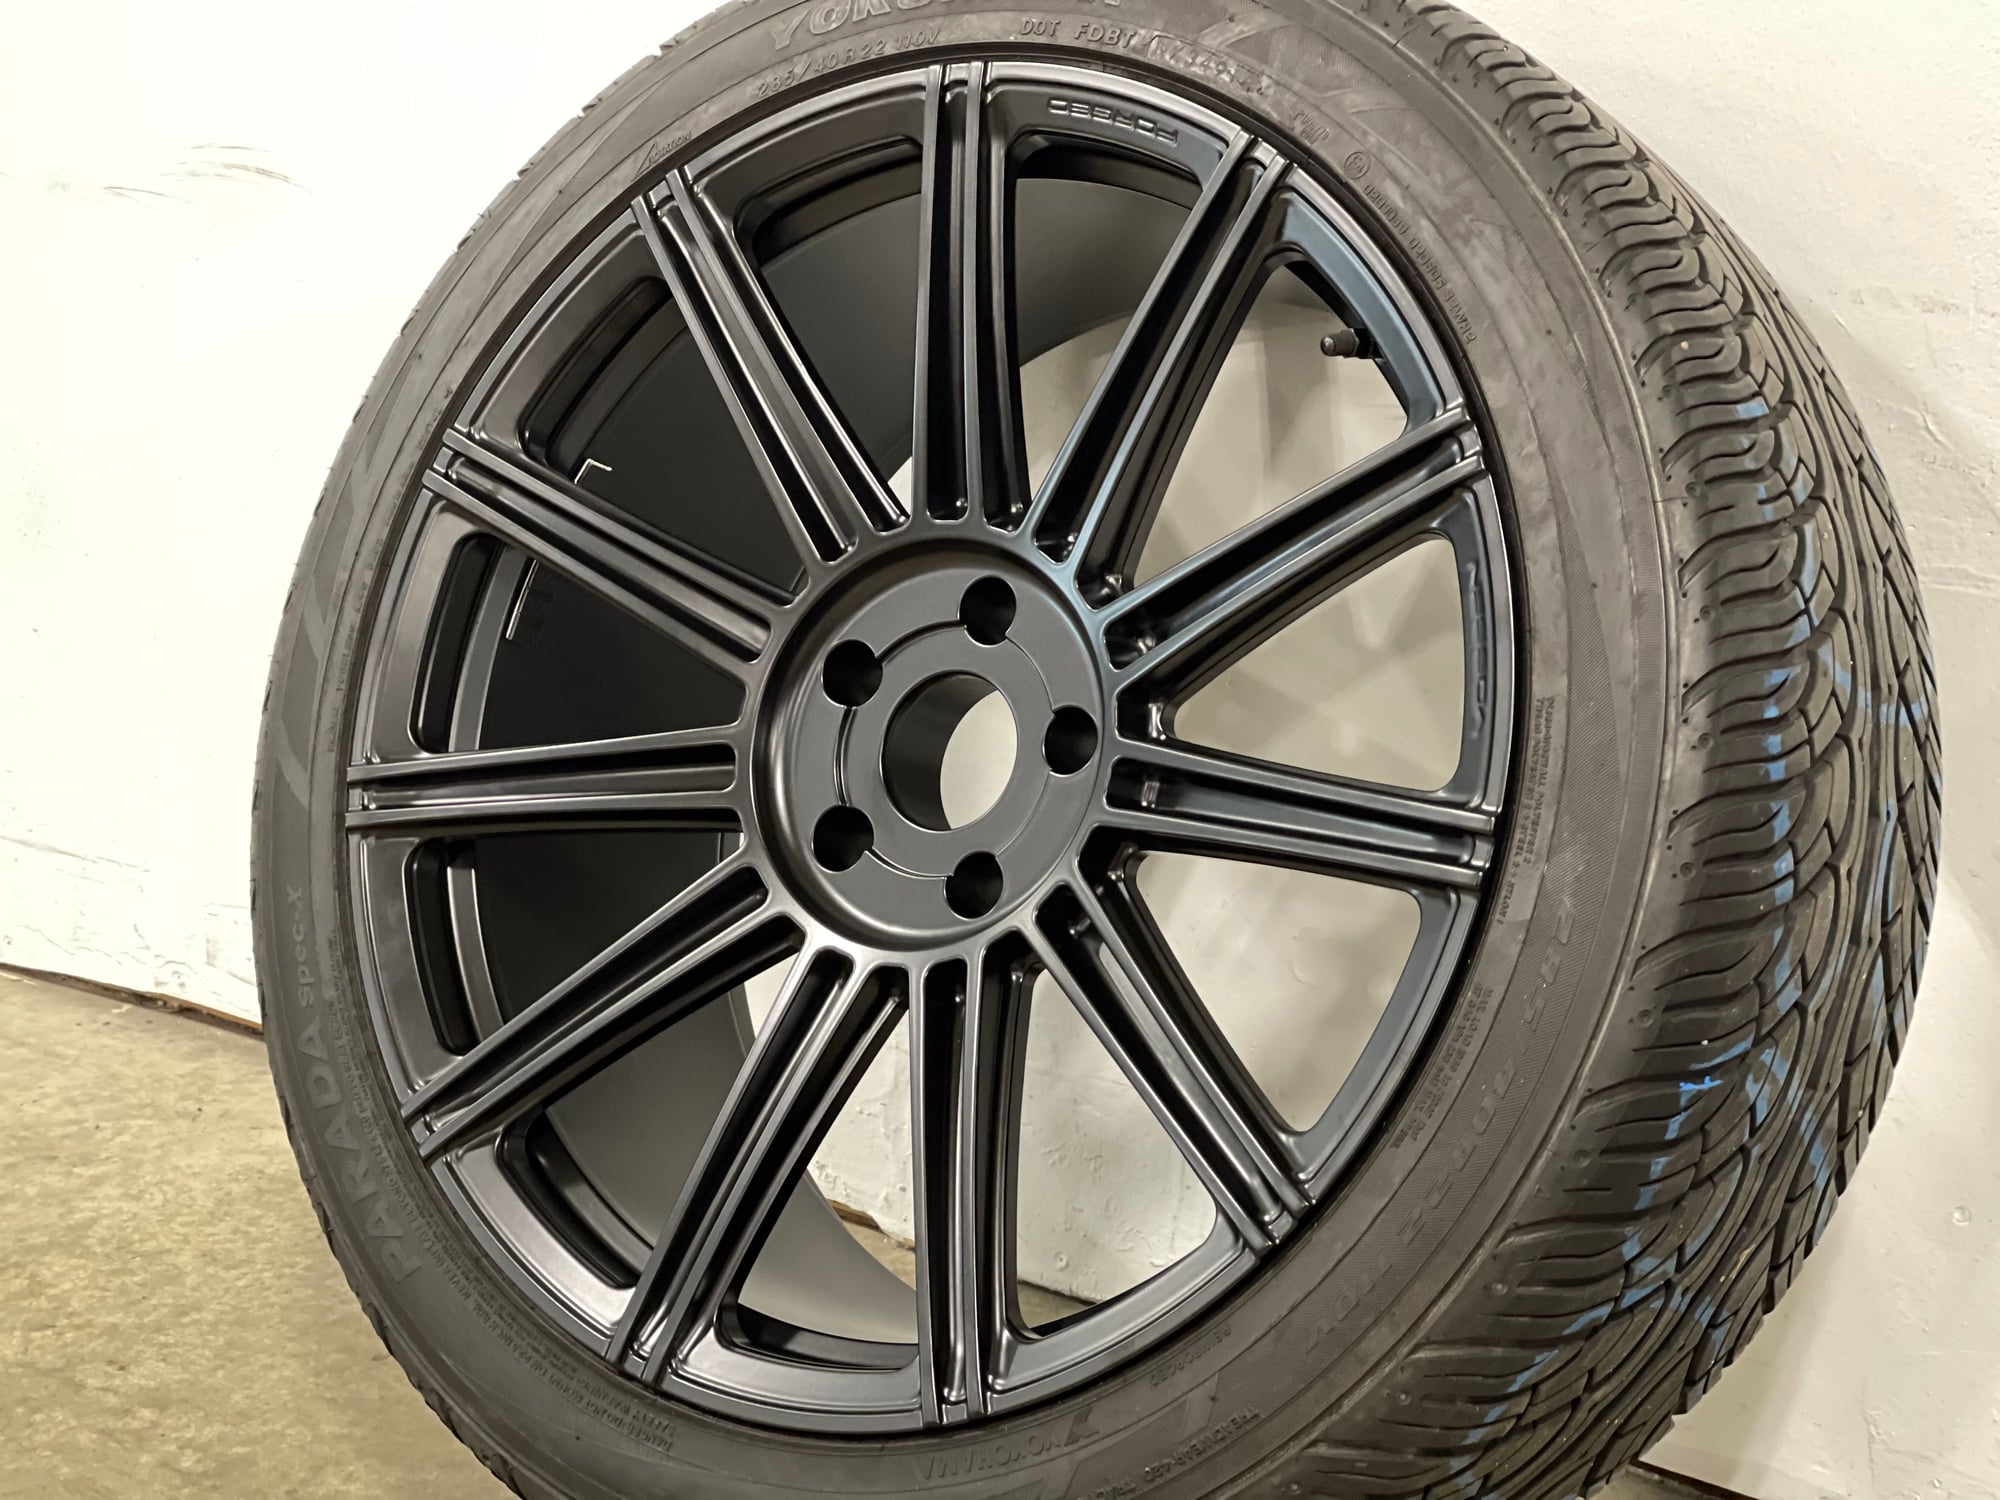 Wheels and Tires/Axles - G550 Vossen 22” S17-12 Wheels/Tires - Used - 2019 to 2022 Mercedes-Benz G-Class - Portland, OR 97005, United States